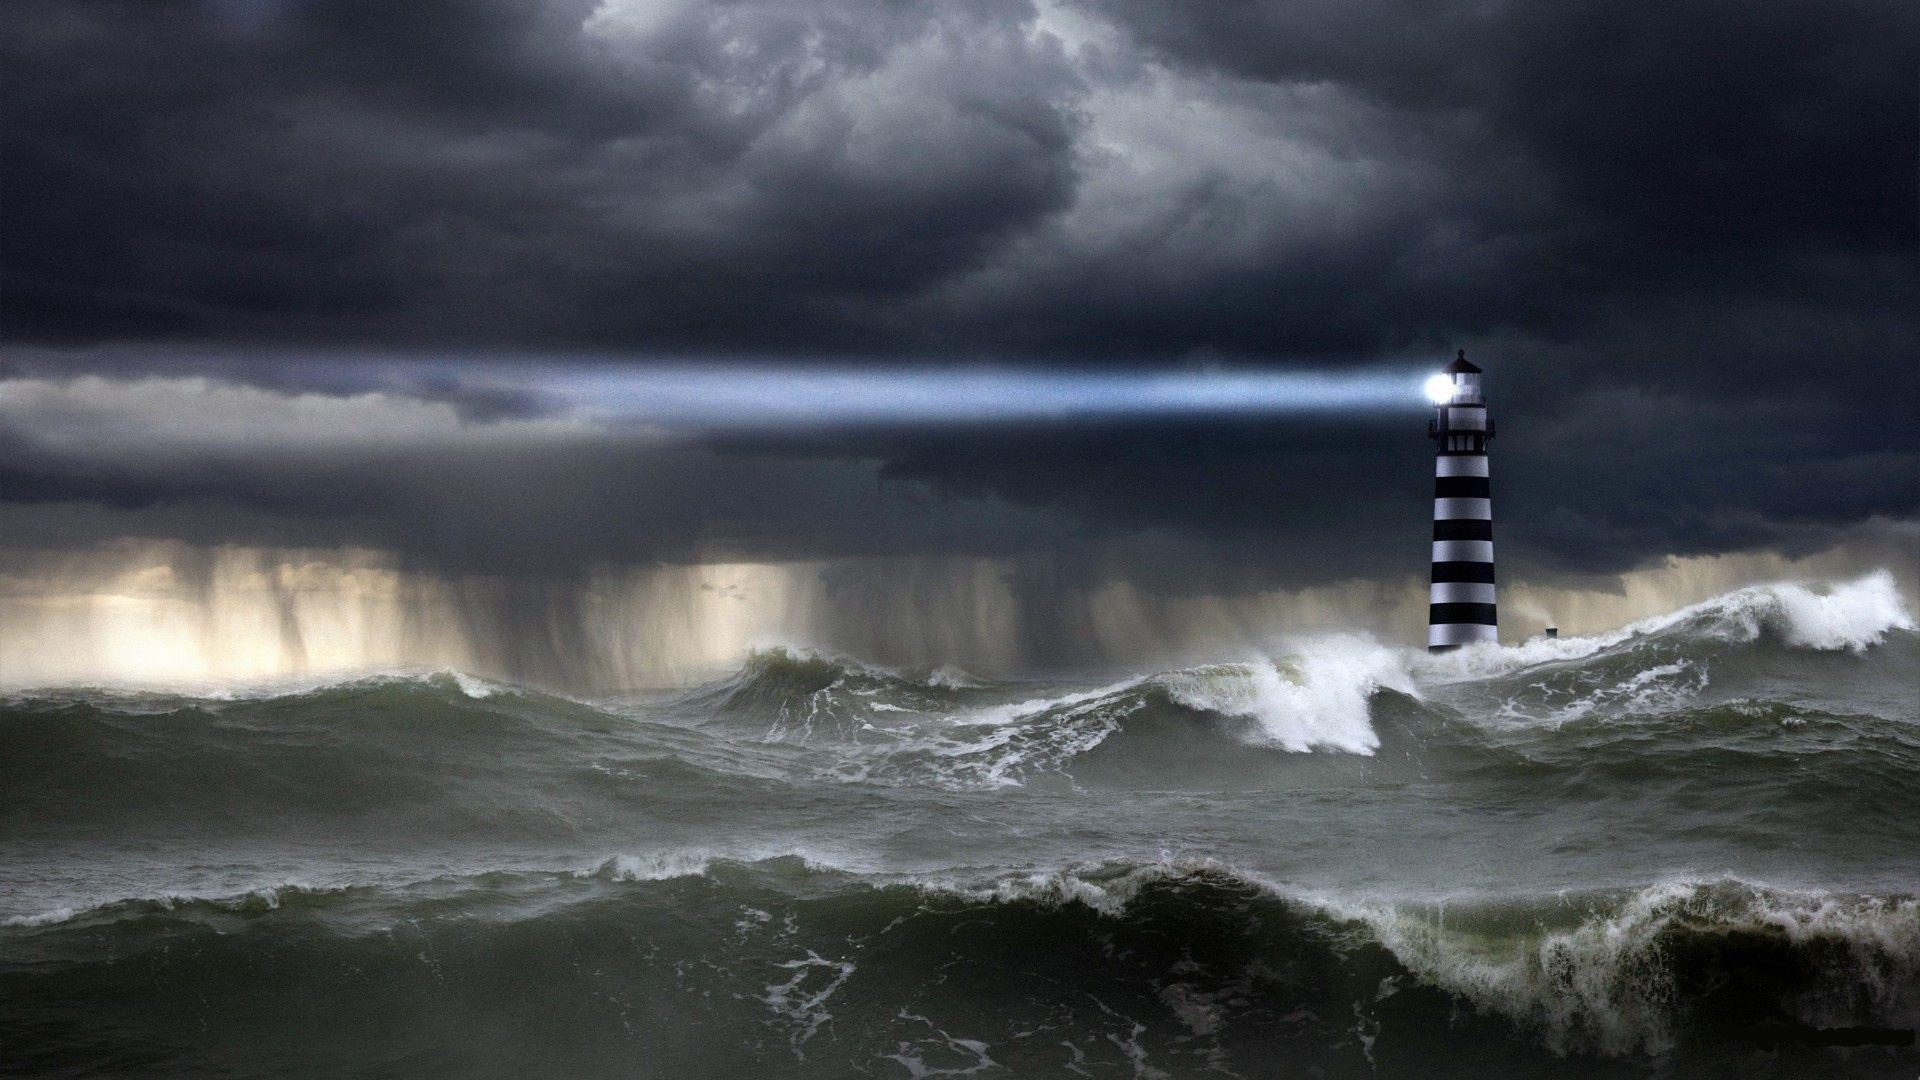 Lighthouse Shining over Rough Seas. WATER. Rain wallpaper, Lighthouse storm, Storm image